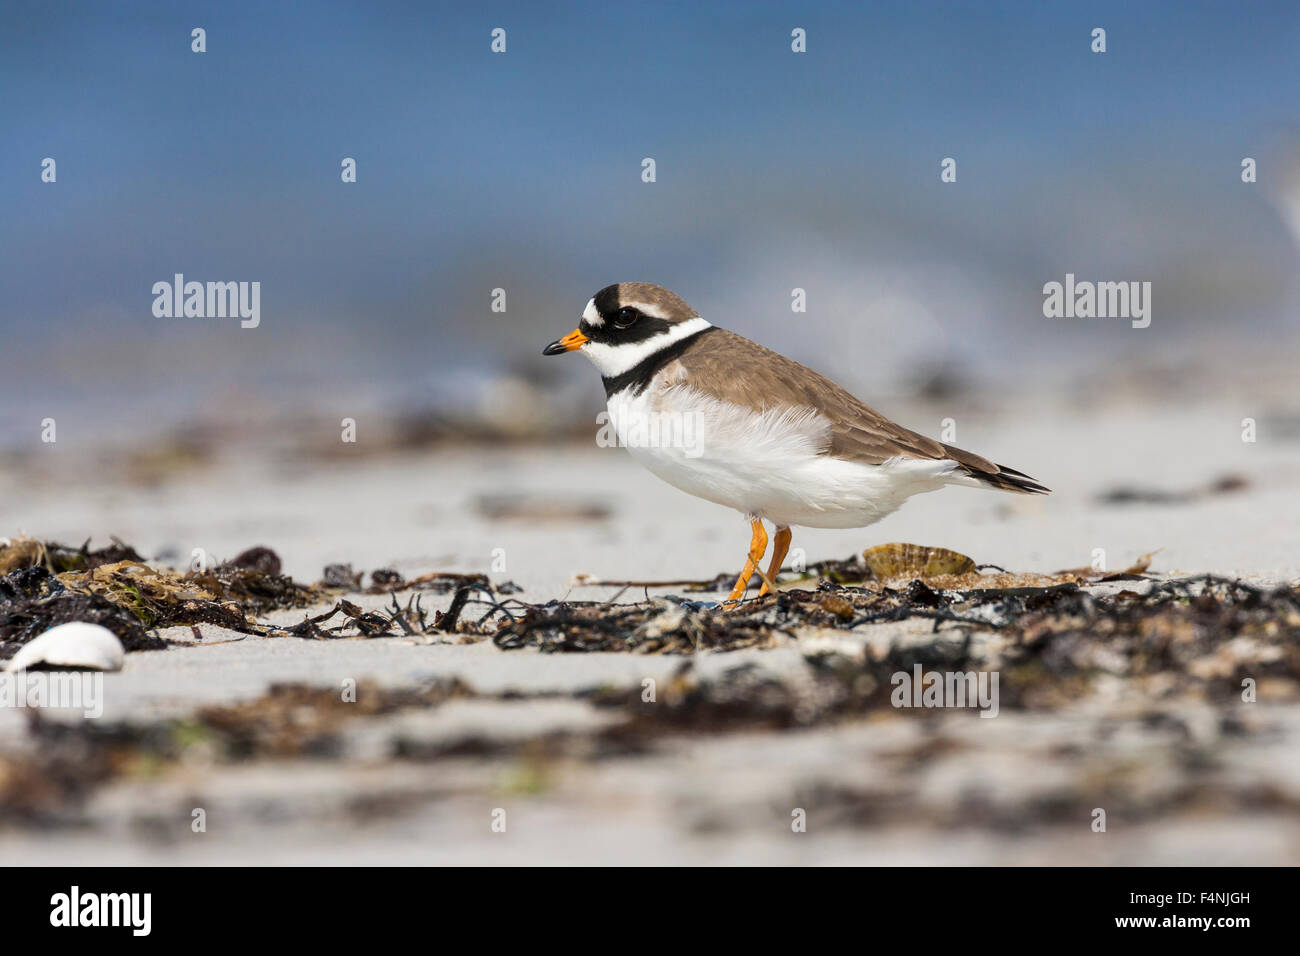 Common ringed plover Charadrius hiaticula, adult, on beach amongst seaweed and shells, North Uist, Outer Hebrides, UK in May. Stock Photo